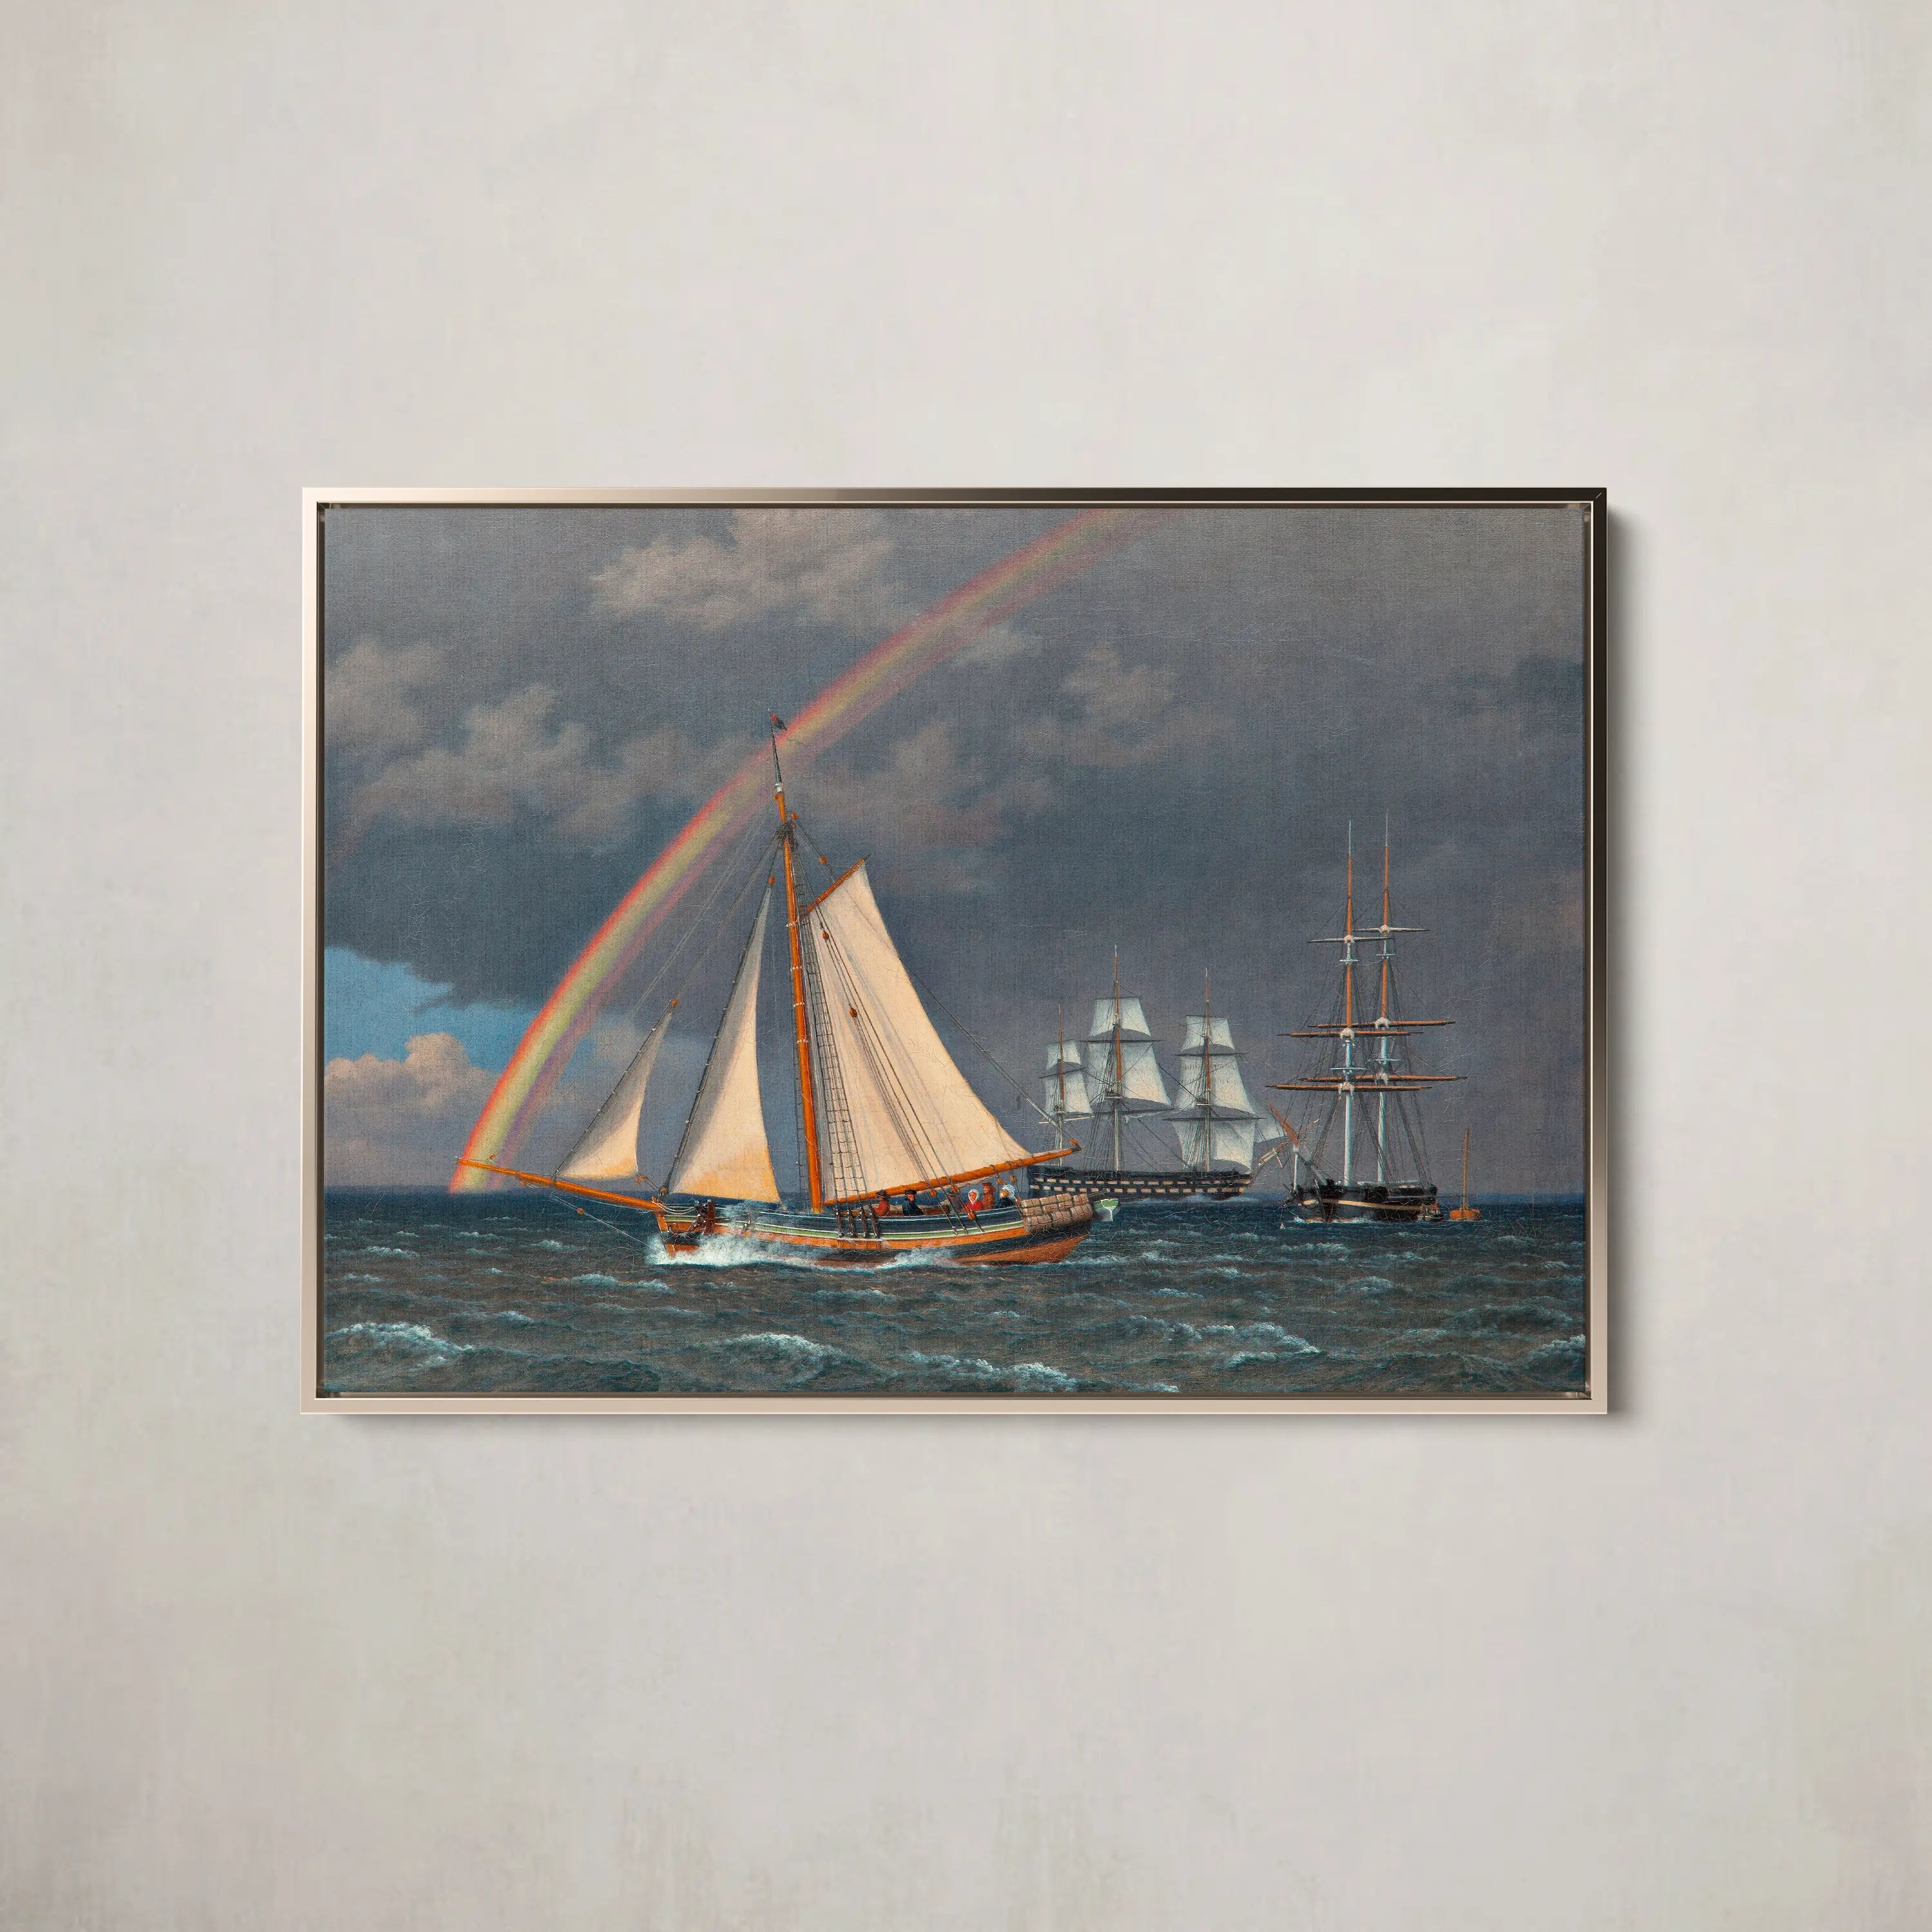 Rainbow at Sea and a Crossing Hunt with other Ships (1836) by Christoffer Wilhelm Eckersberg